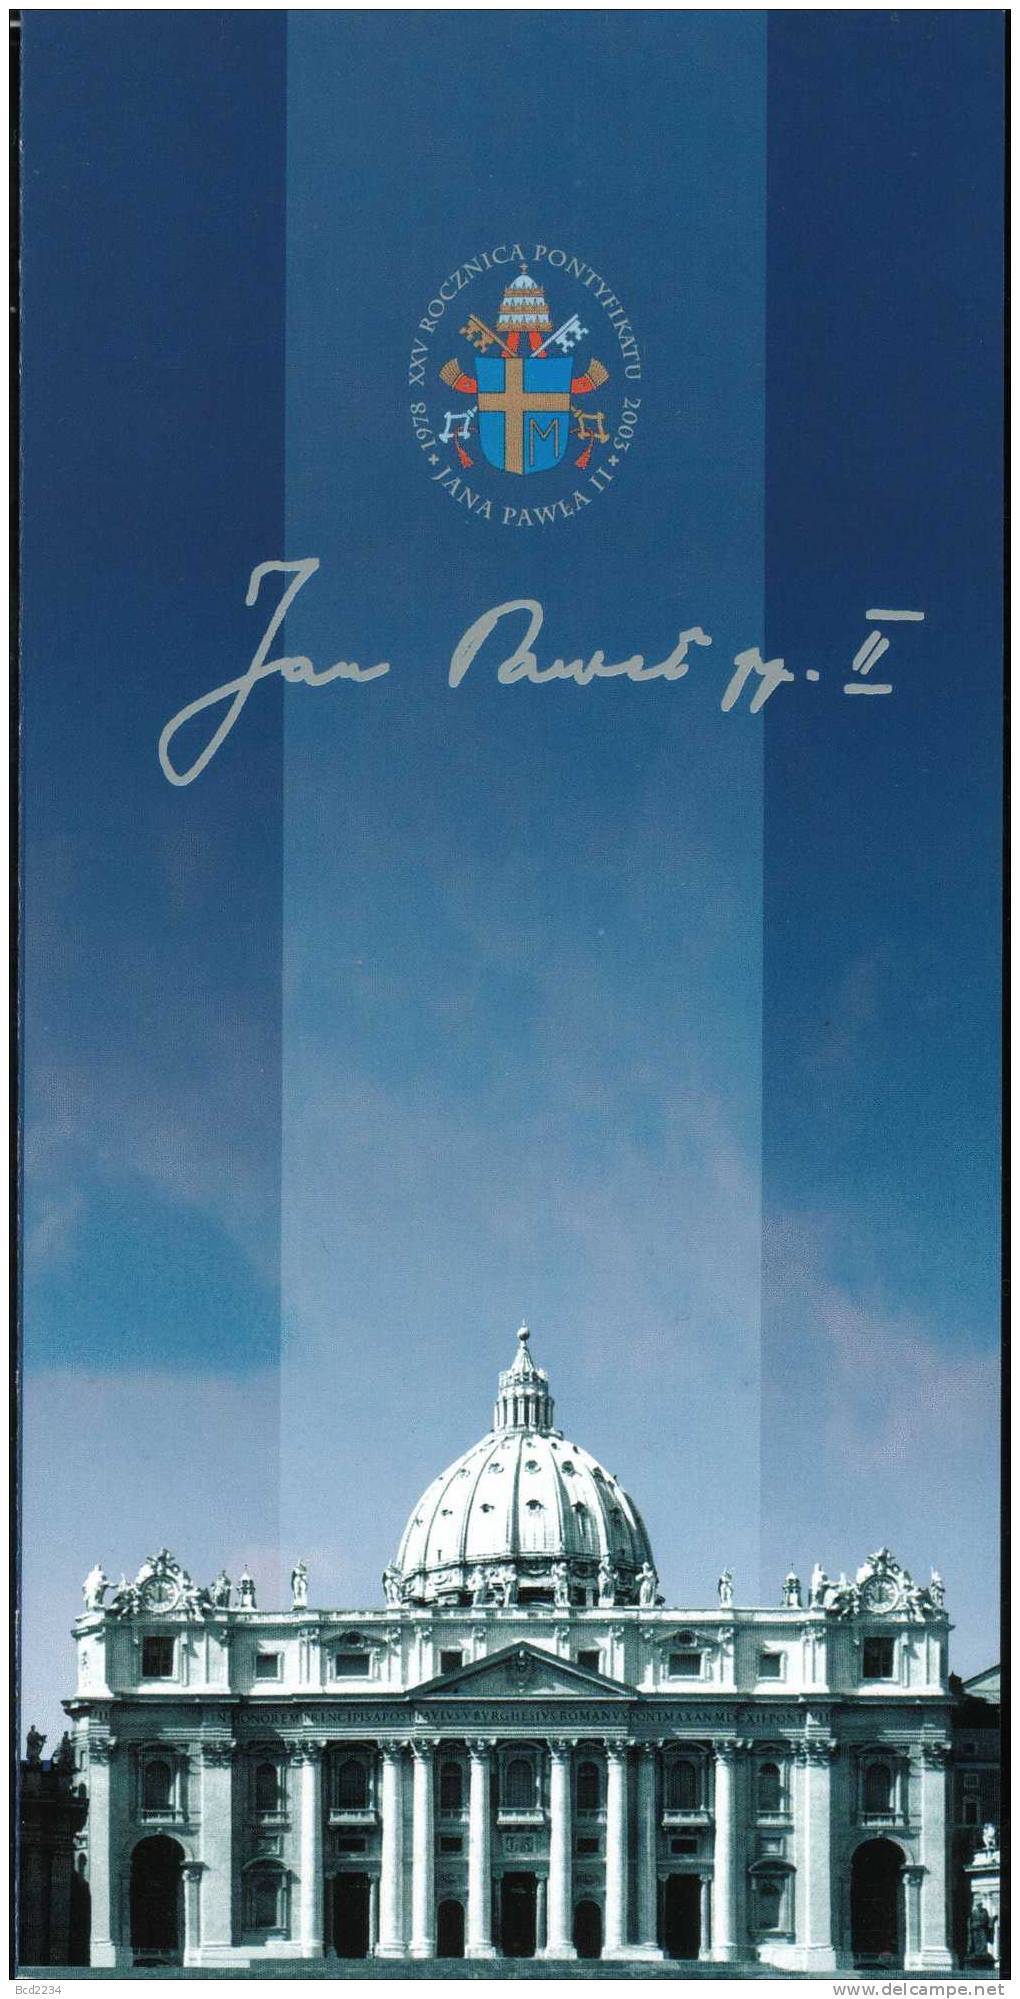 POLAND VATICAN 2003 POPE JOHN PAUL JP2 JPII 25 YRS SILVER STAMP - SPECIAL BLUE FOLDER !!!!! Famous Poles - Covers & Documents